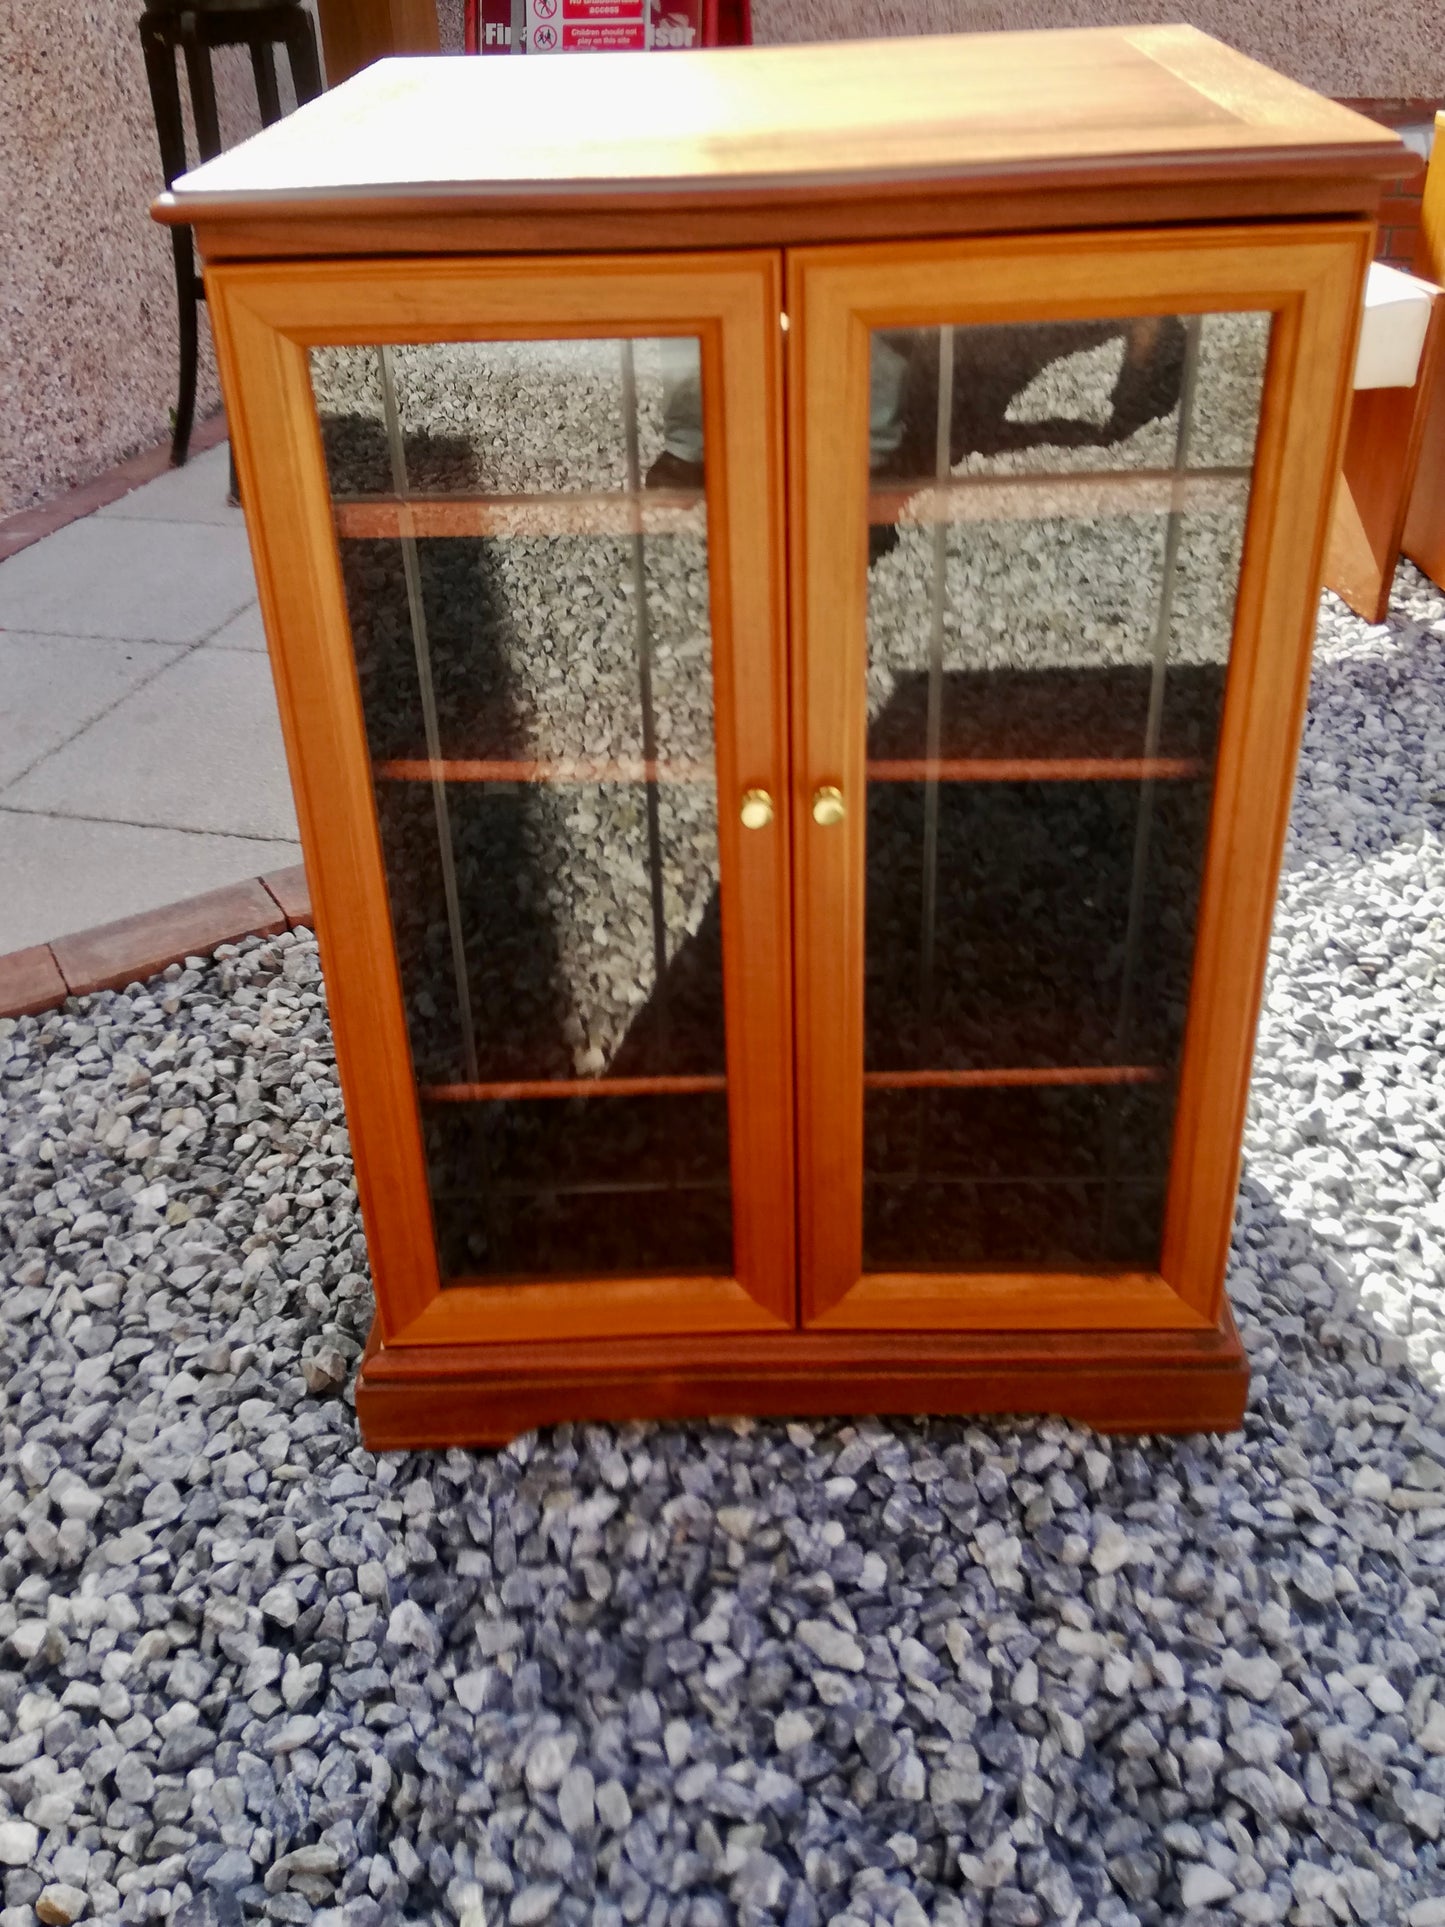 Vintage  glass fronted cabinet available for painting